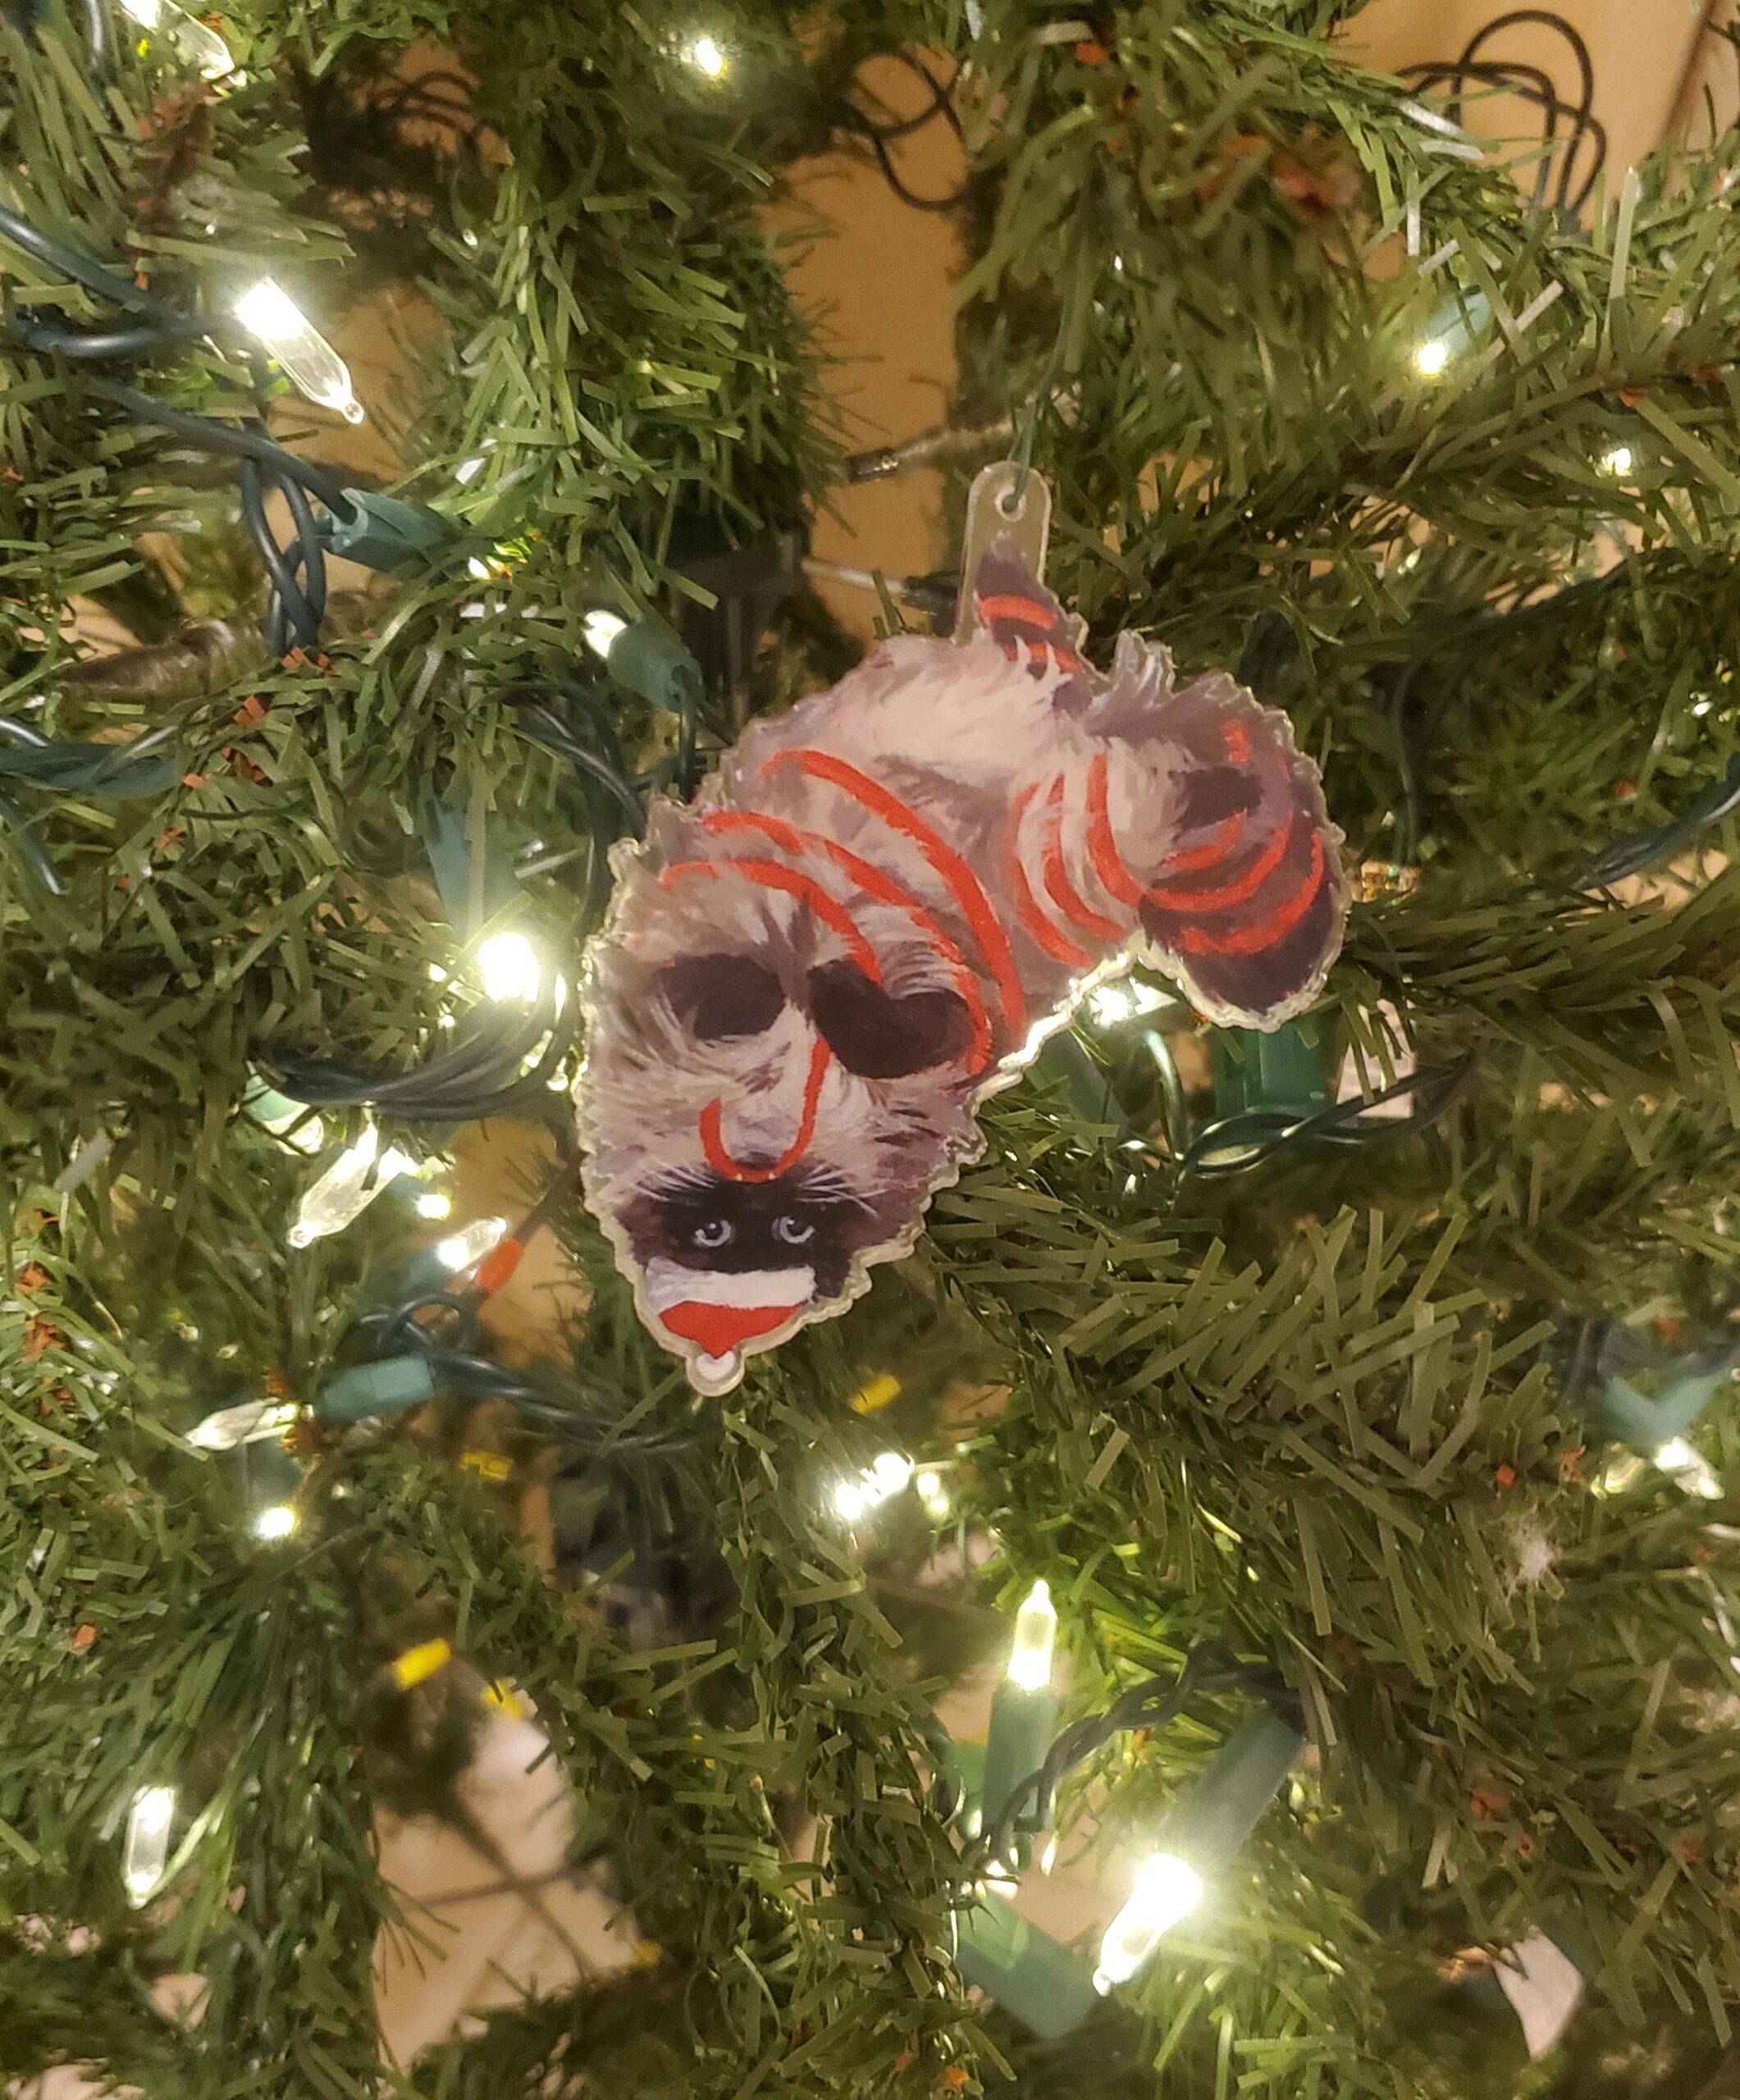 Noodle has the honor of being the foremost decoration on our tree this year.